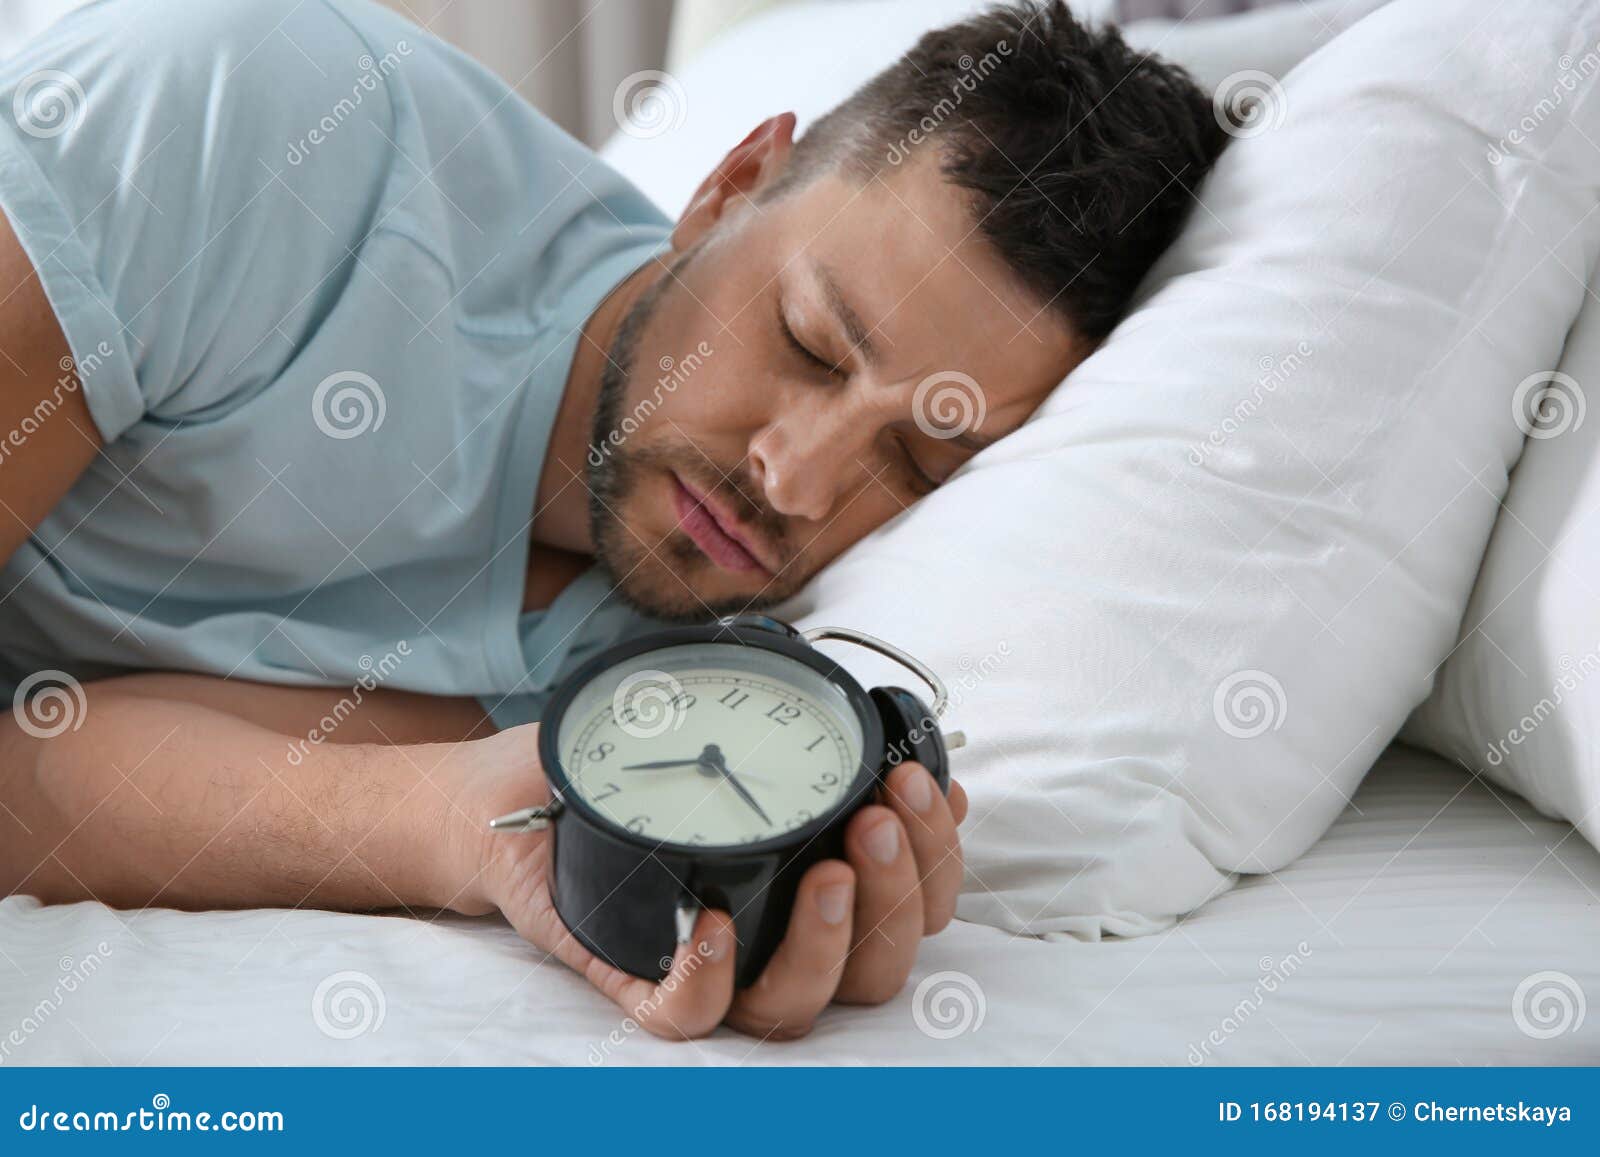 Man Sleeping With Alarm Clock At Home Stock Image Image Of Clock